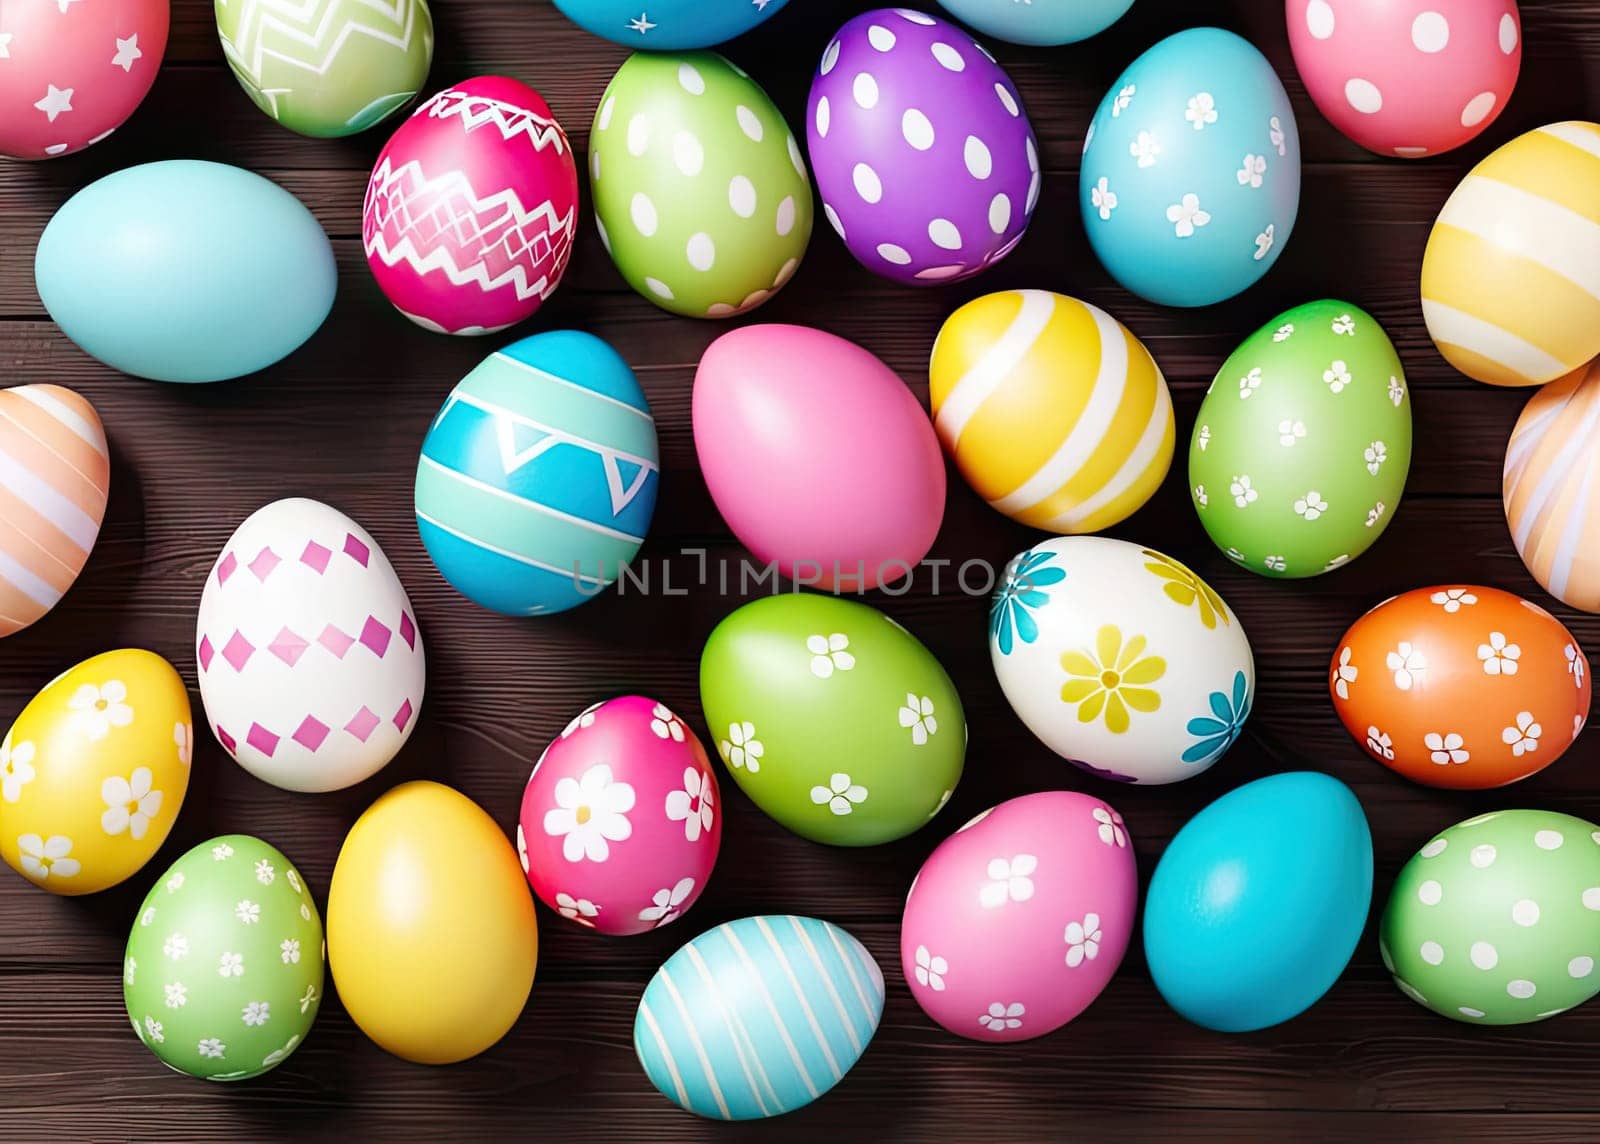 Easter eggs on wooden background by Ladouski